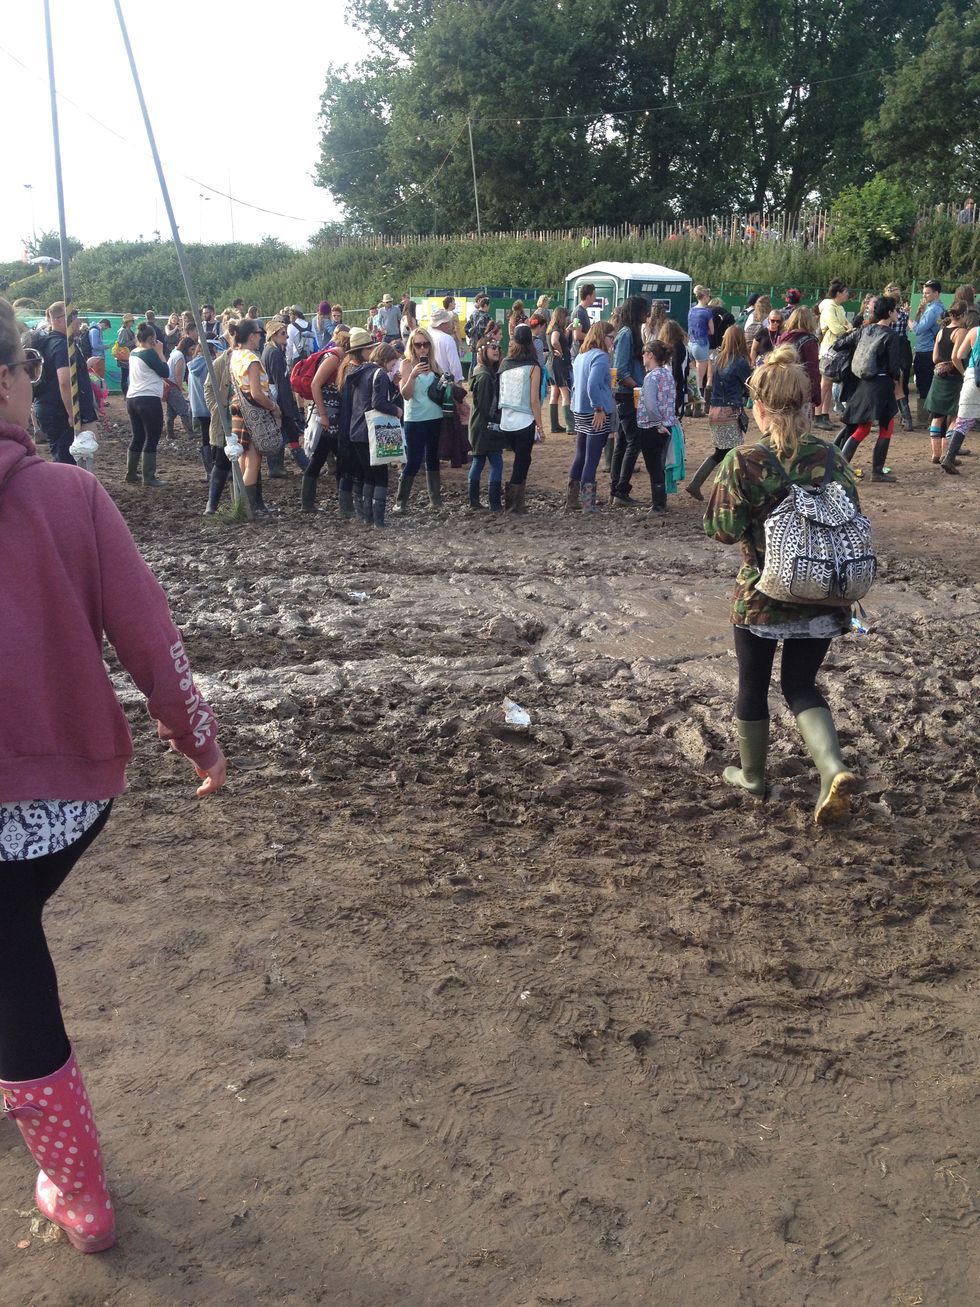 Why can't everyone just admit that Glastonbury is rubbish?